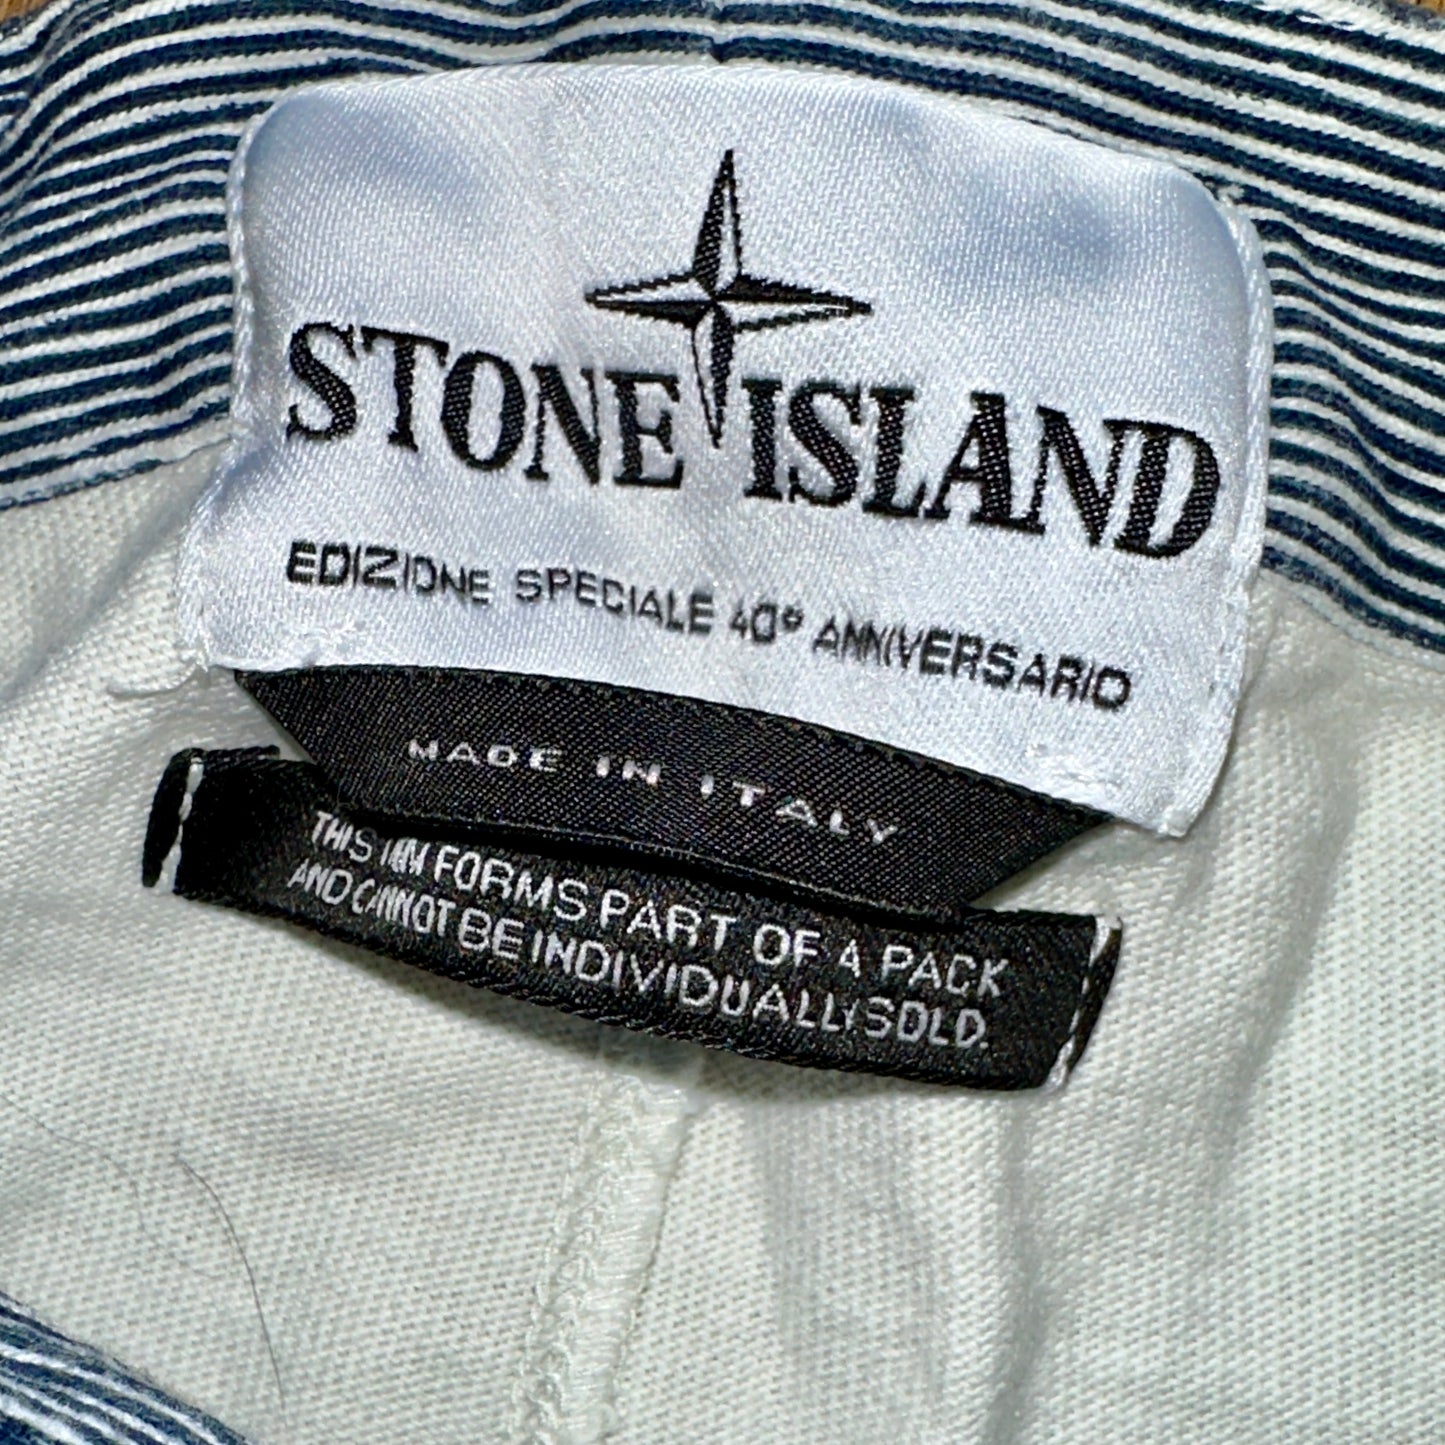 Stone Island 40 Anni Kit Special Edition 1986 Retro Jogger Pants - XXL - Made in Italy